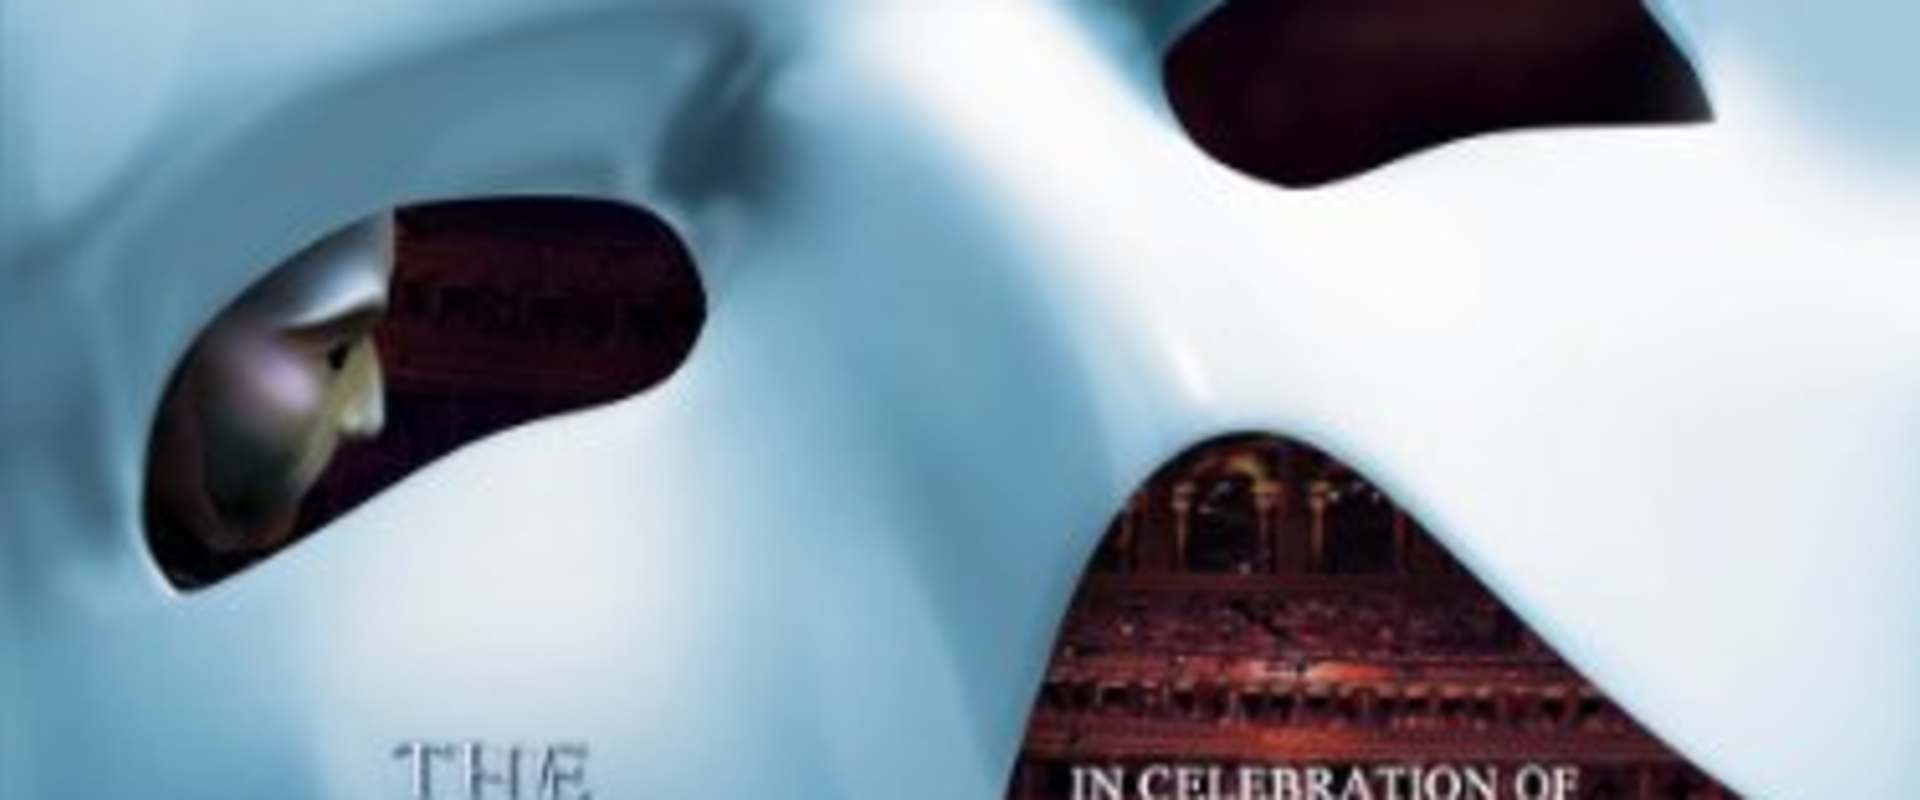 The Phantom of the Opera at the Royal Albert Hall background 1